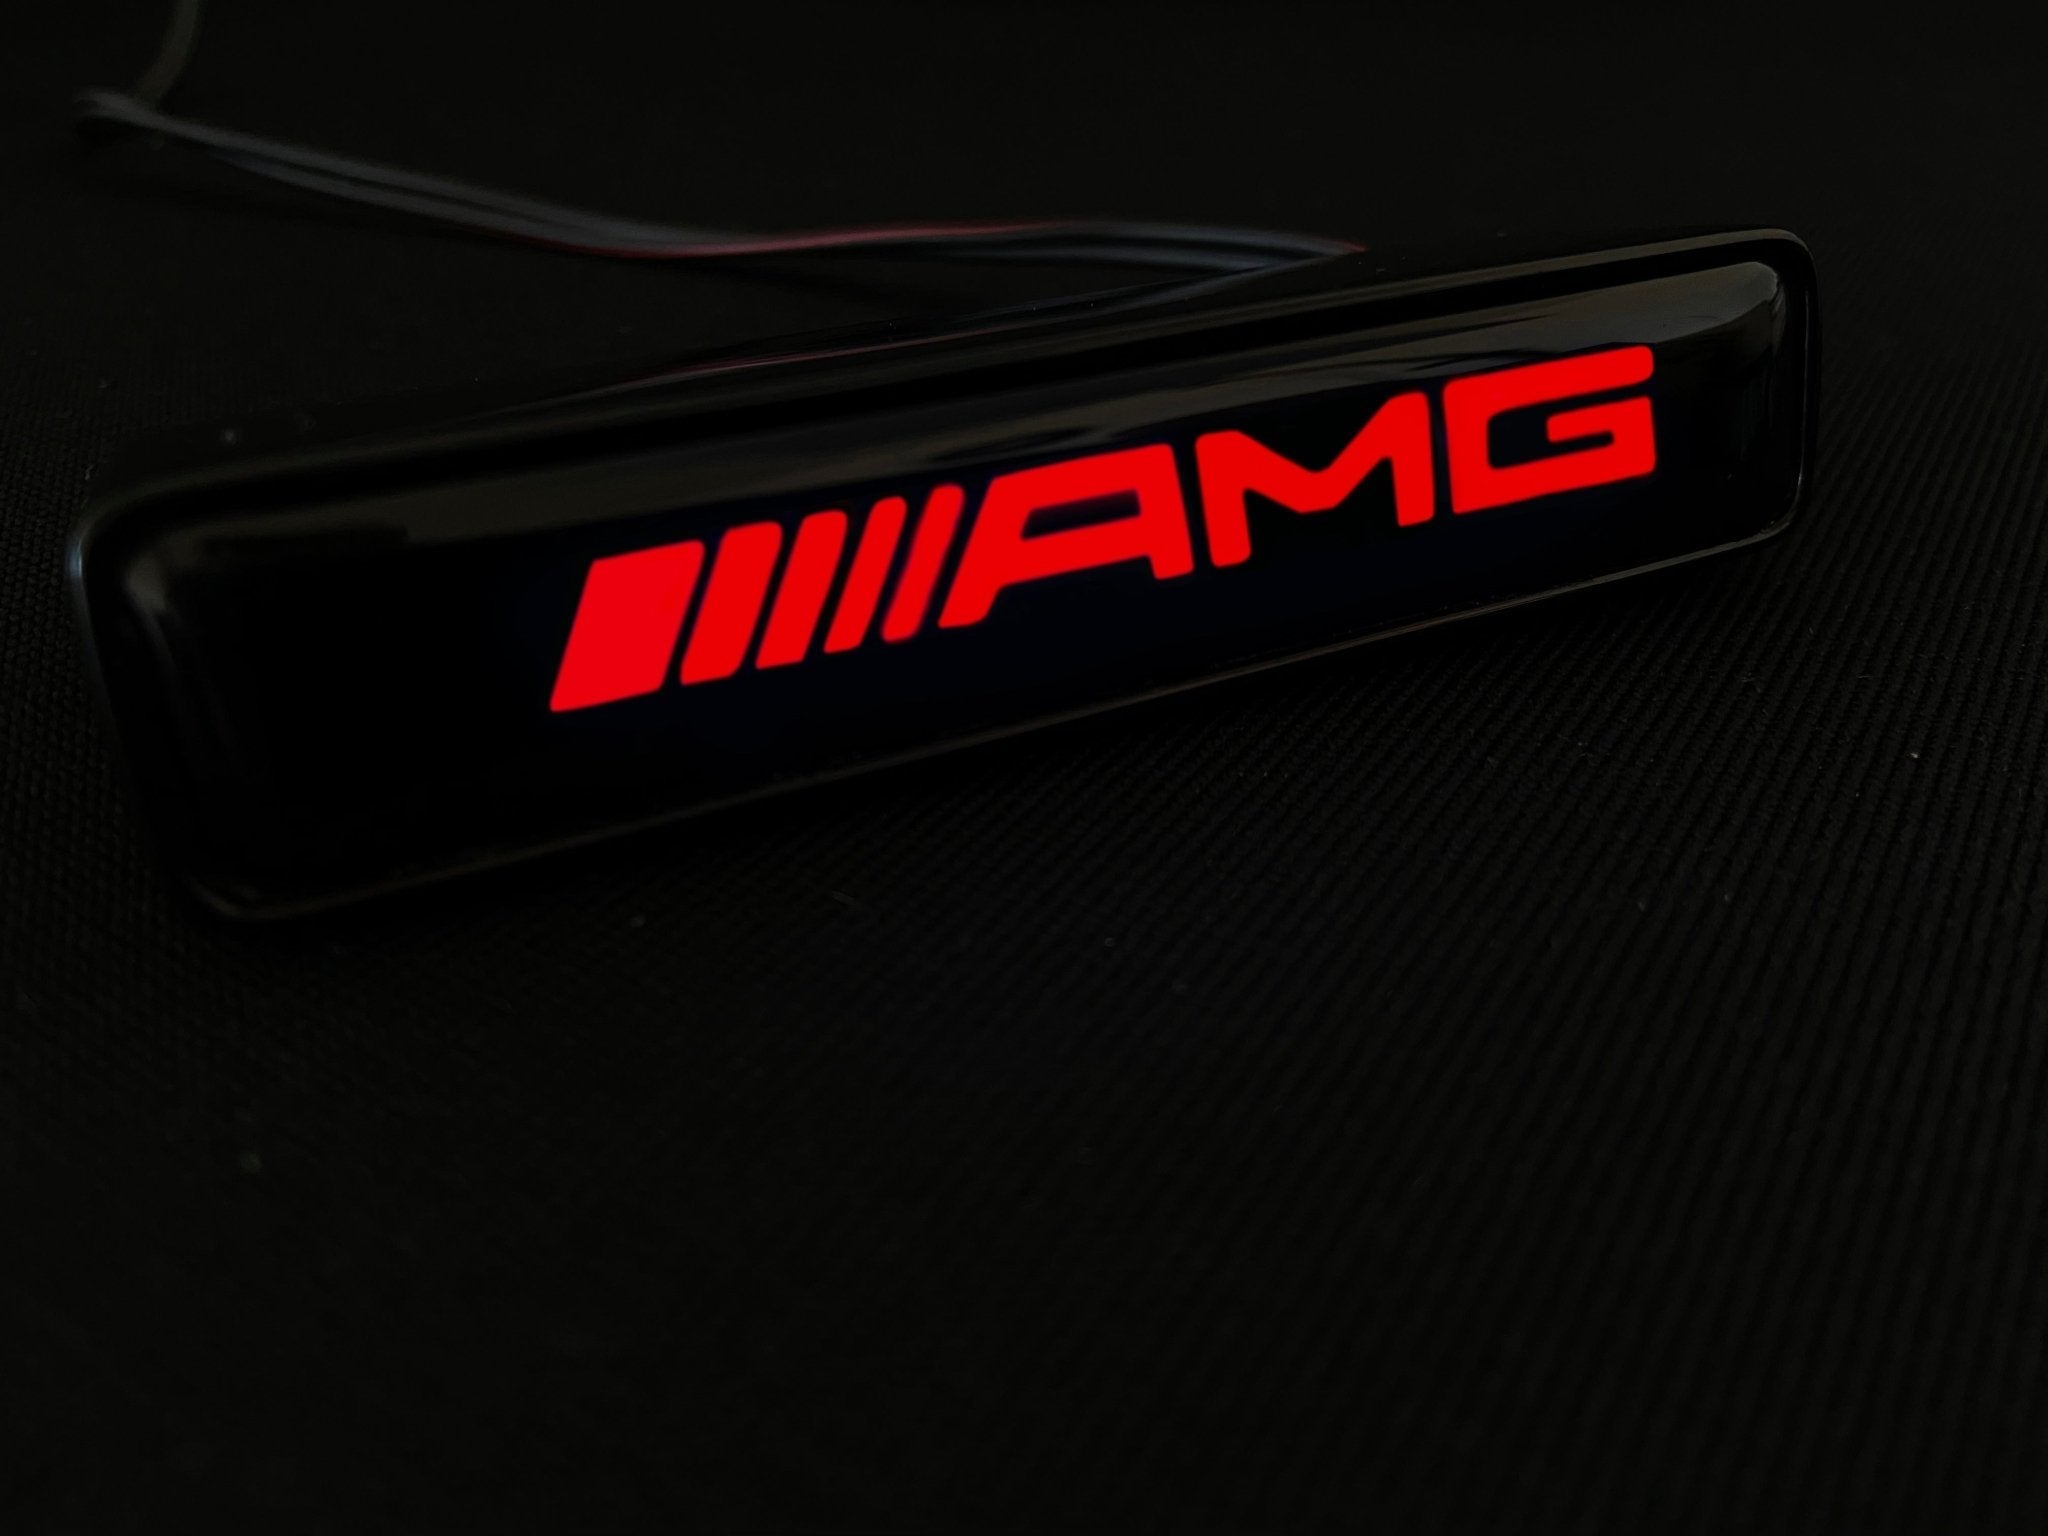 AMG style Front Grille red LED Illuminated Logo Badge Emblem for Mercedes Benz G-Wagon G-Class W463 W463A W464